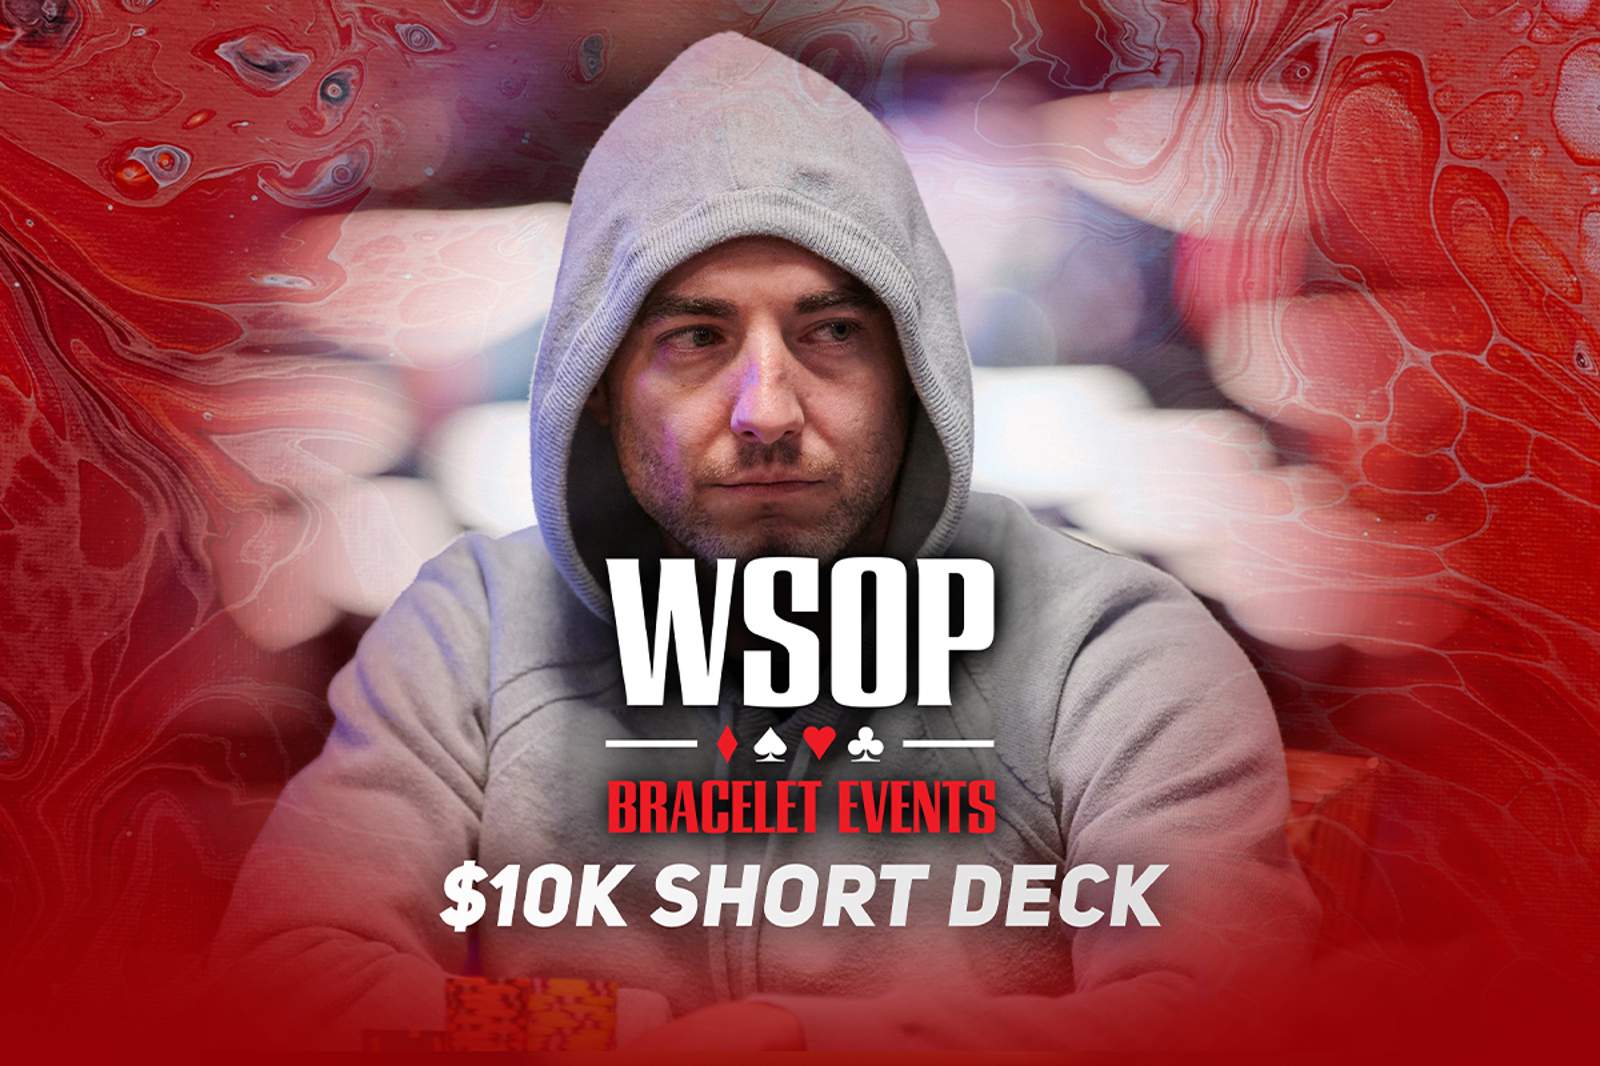 Watch the WSOP Event #29: $10,000 Short Deck Final Table on PokerGO.com at 8 p.m. ET